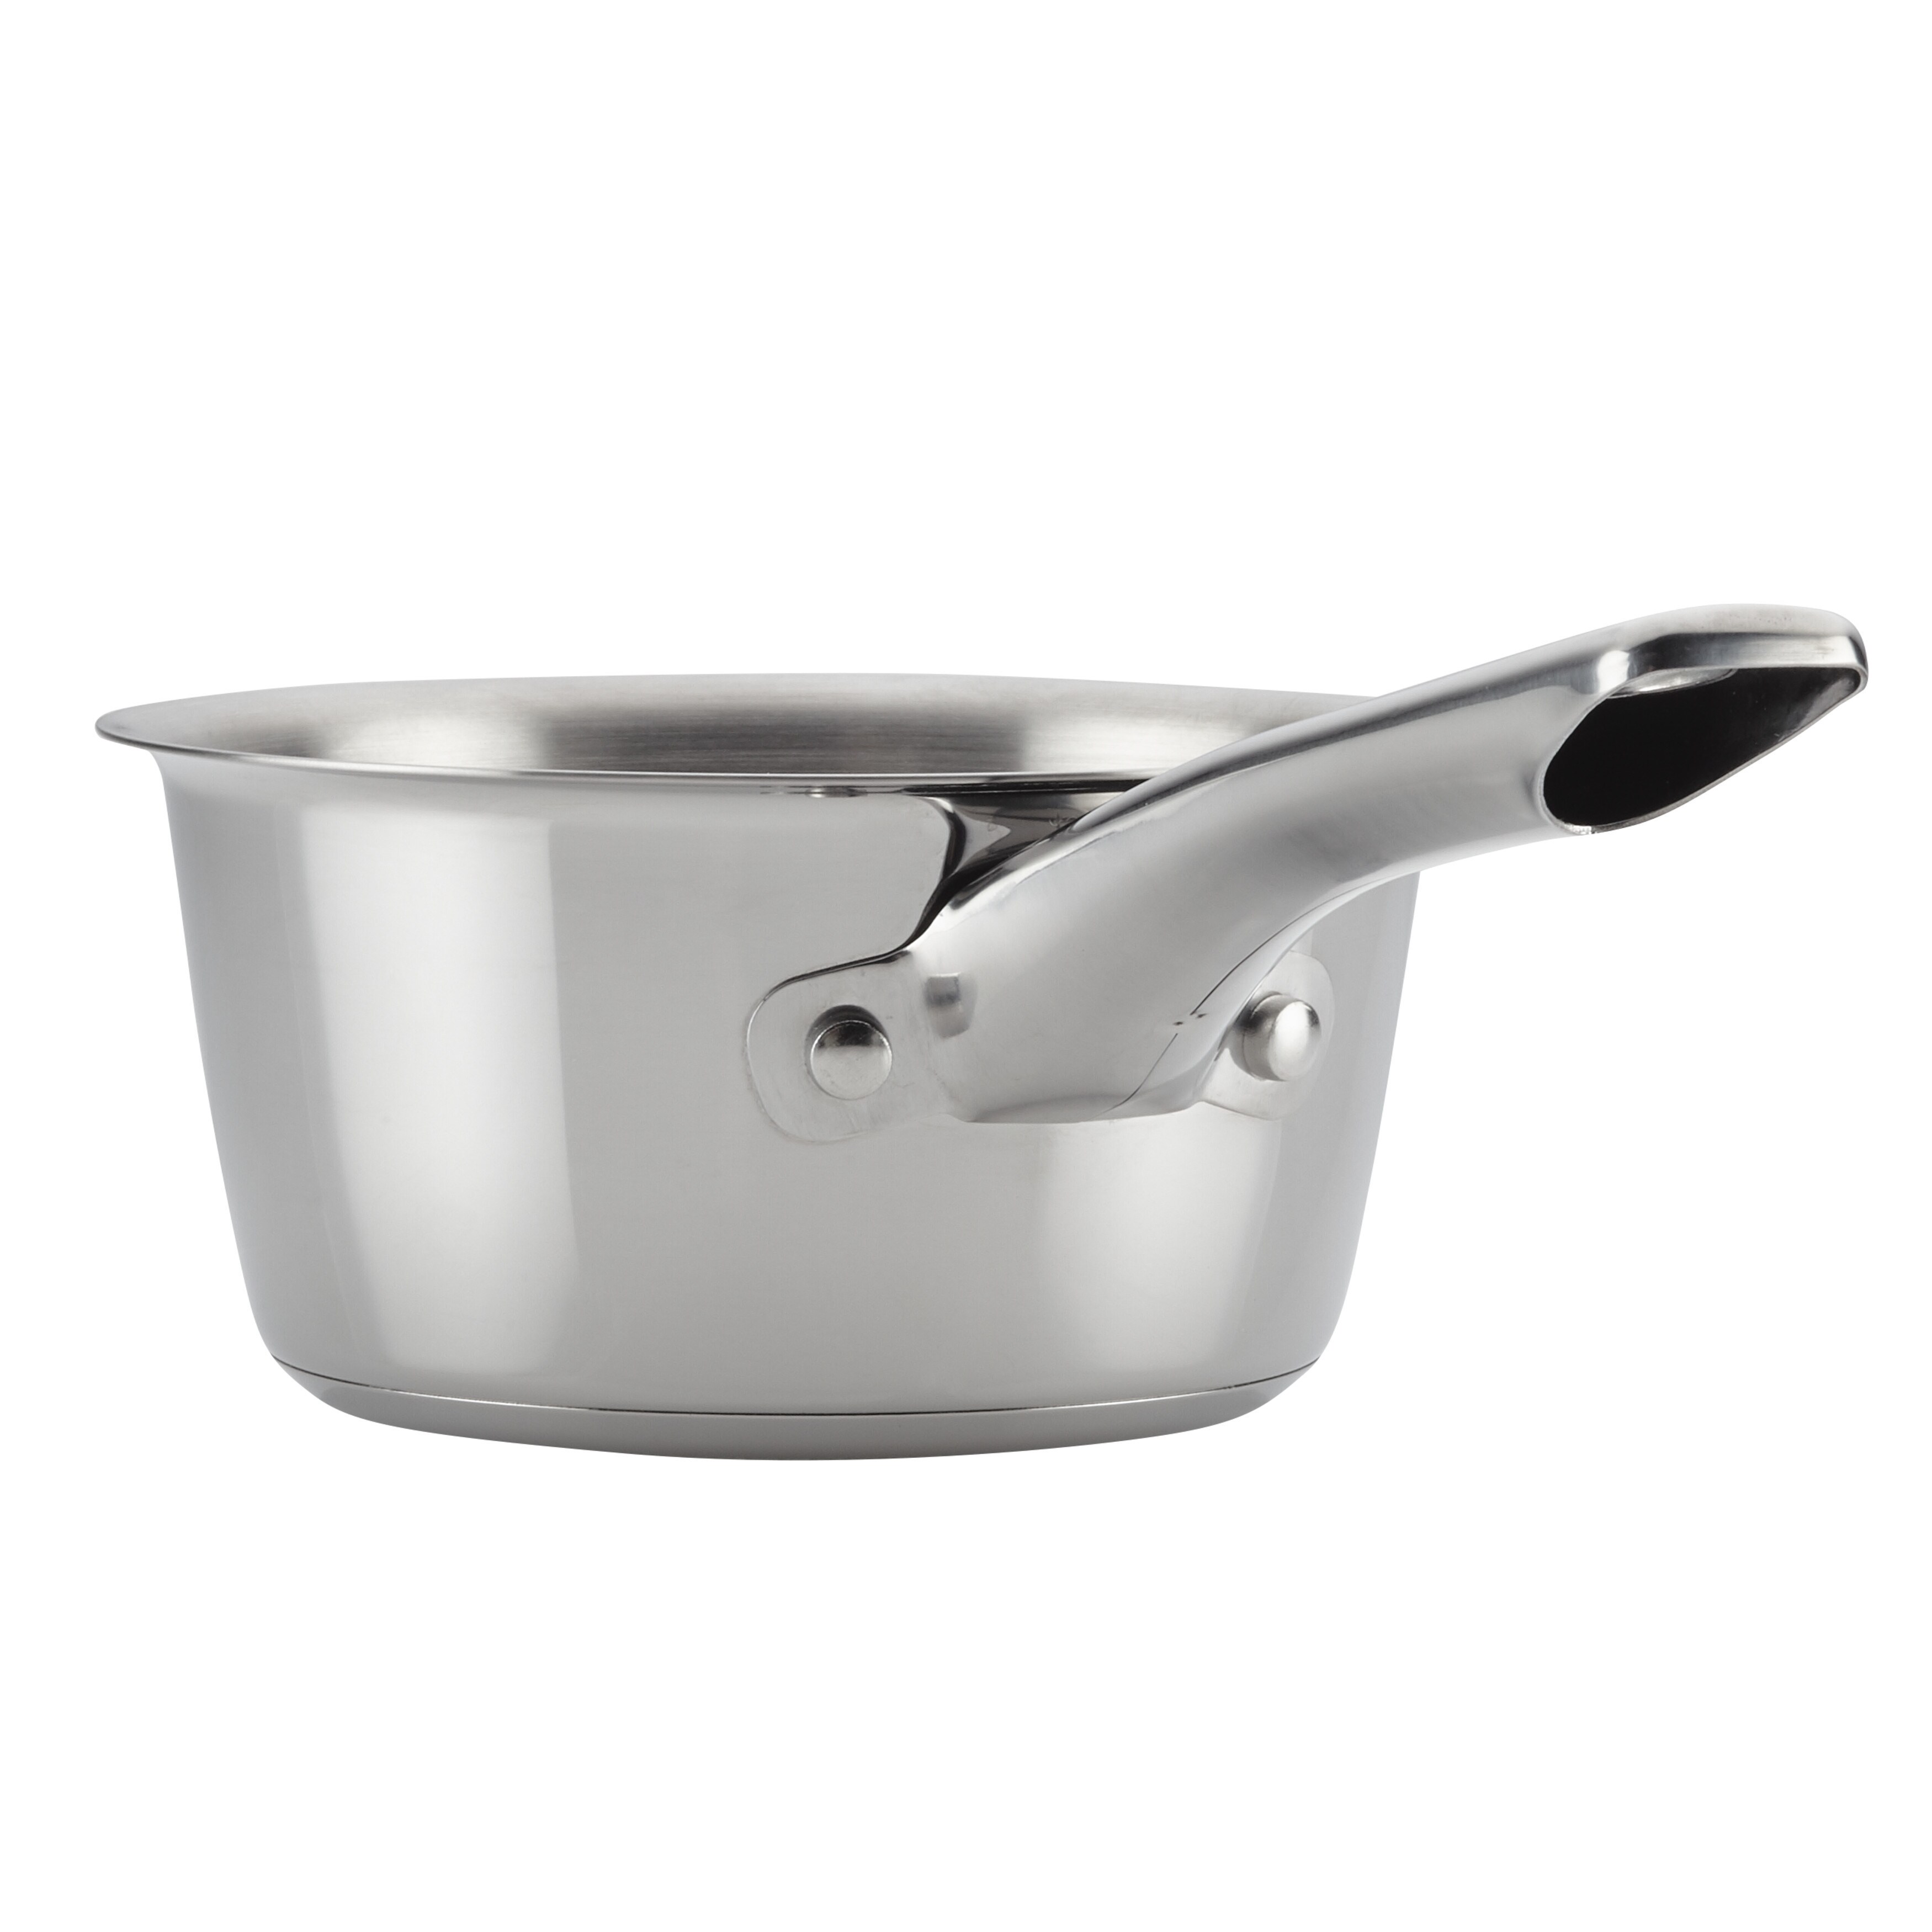 https://ak1.ostkcdn.com/images/products/20005441/Ayesha-Curry-Home-Collection-Stainless-Steel-Saucepan-1-Quart-ccc7990a-13e8-4c6f-aa5d-82465806057f.jpg